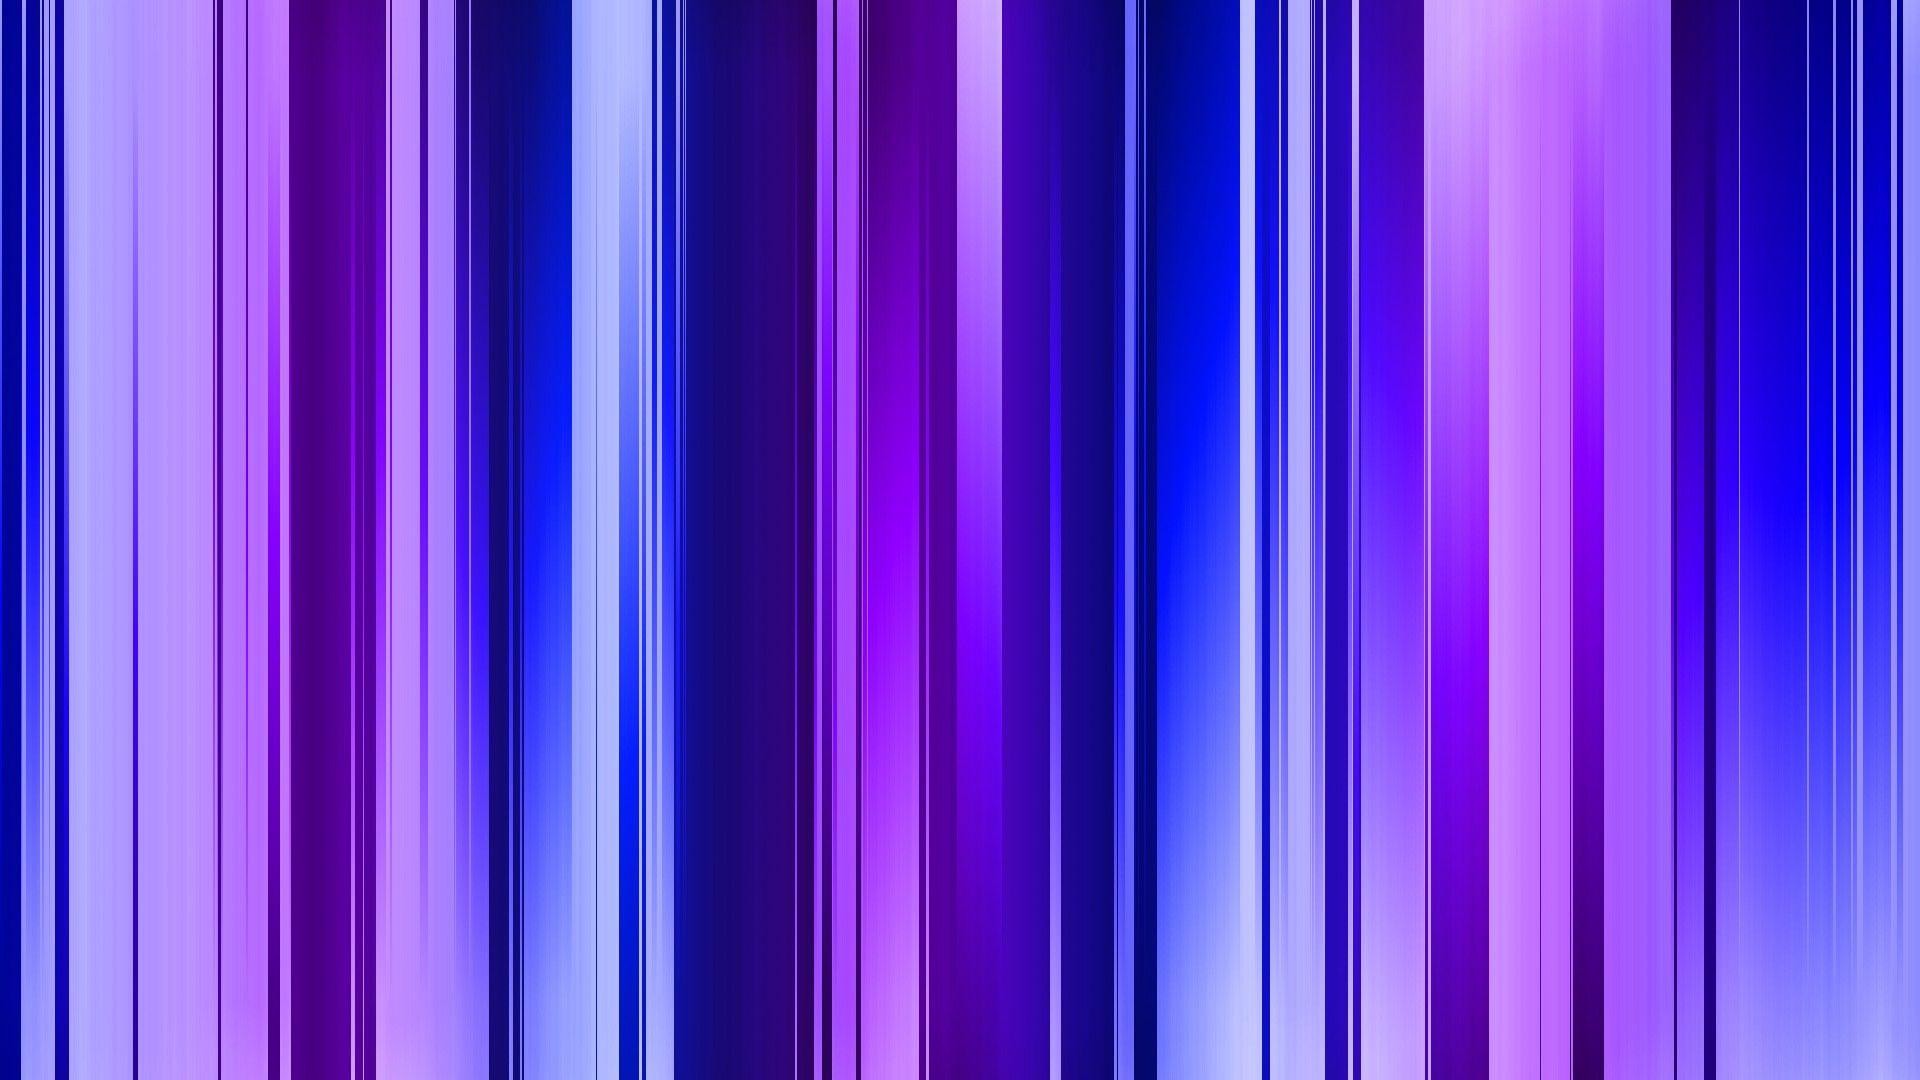 Blue And Purple Ombre Wallpaper (Picture)